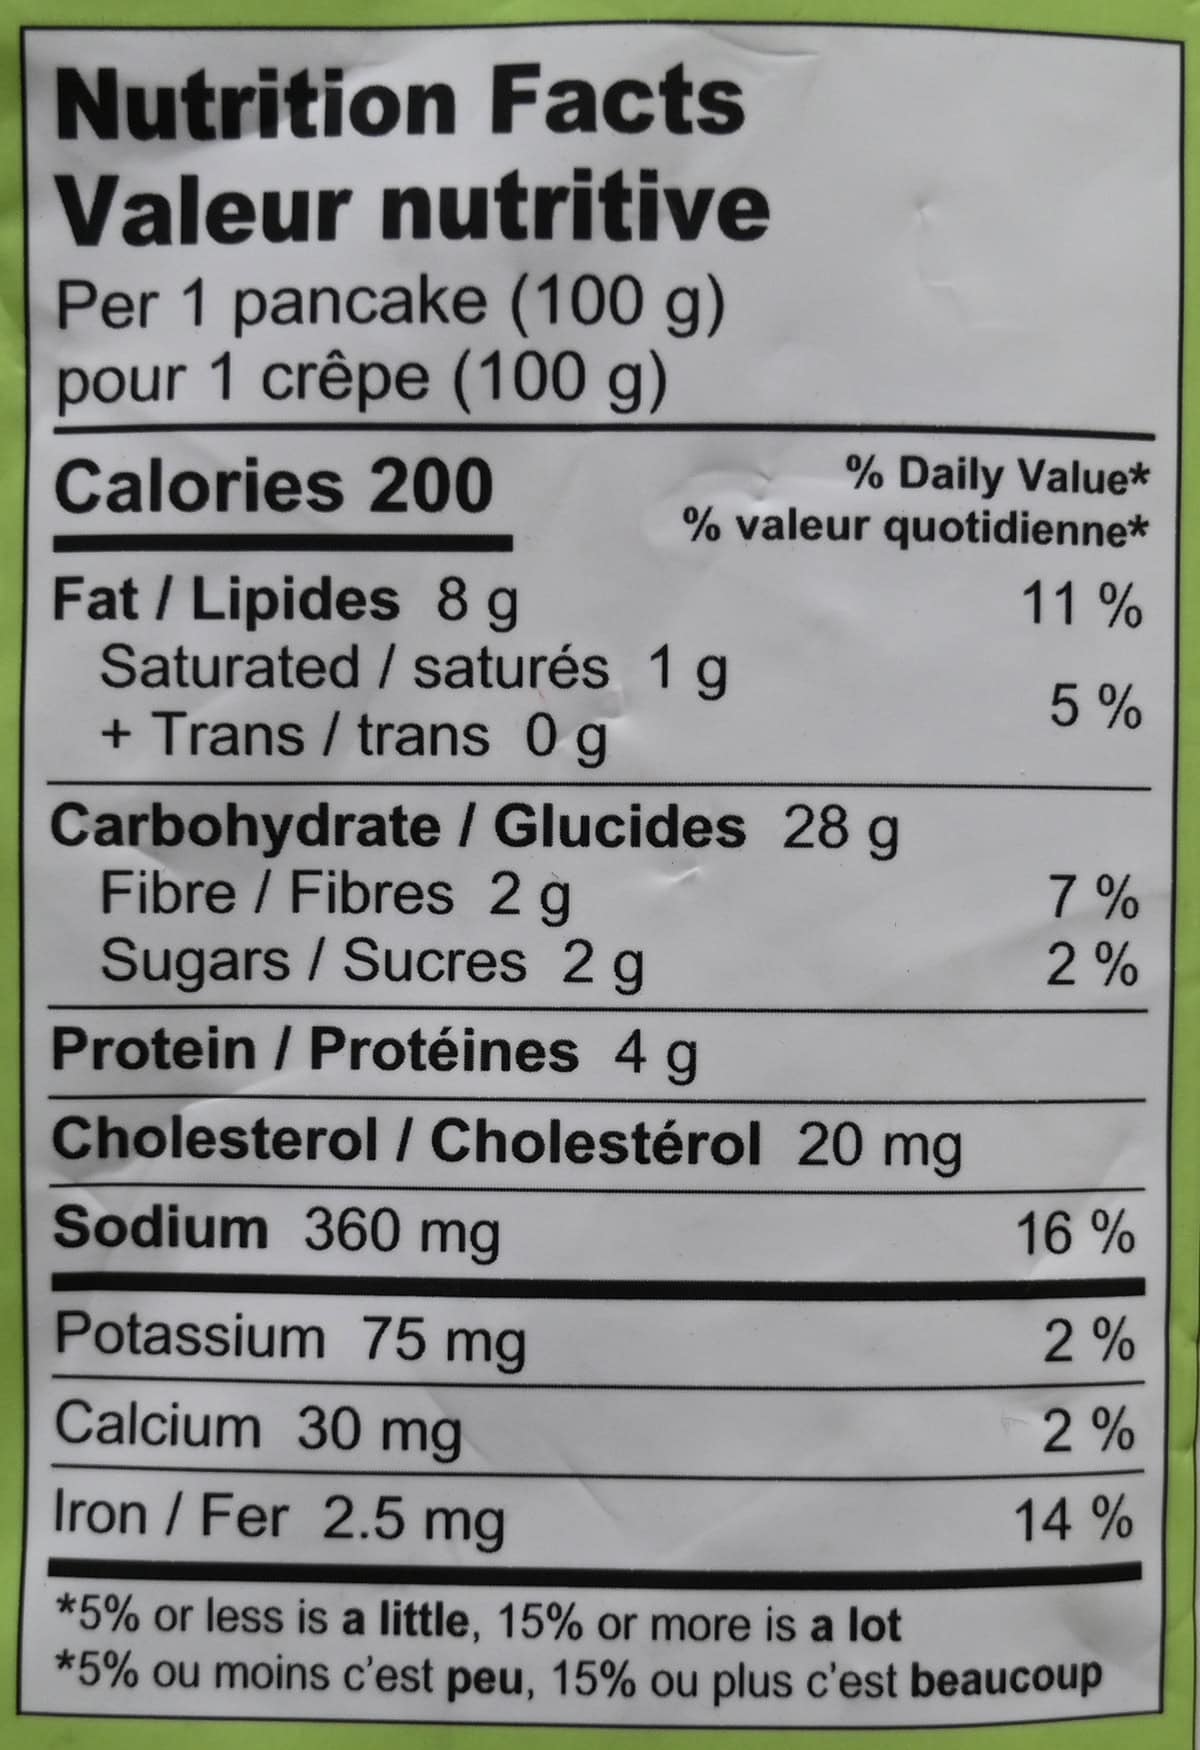 Image of the nutrition facts for the pancakes from the back of the bag.